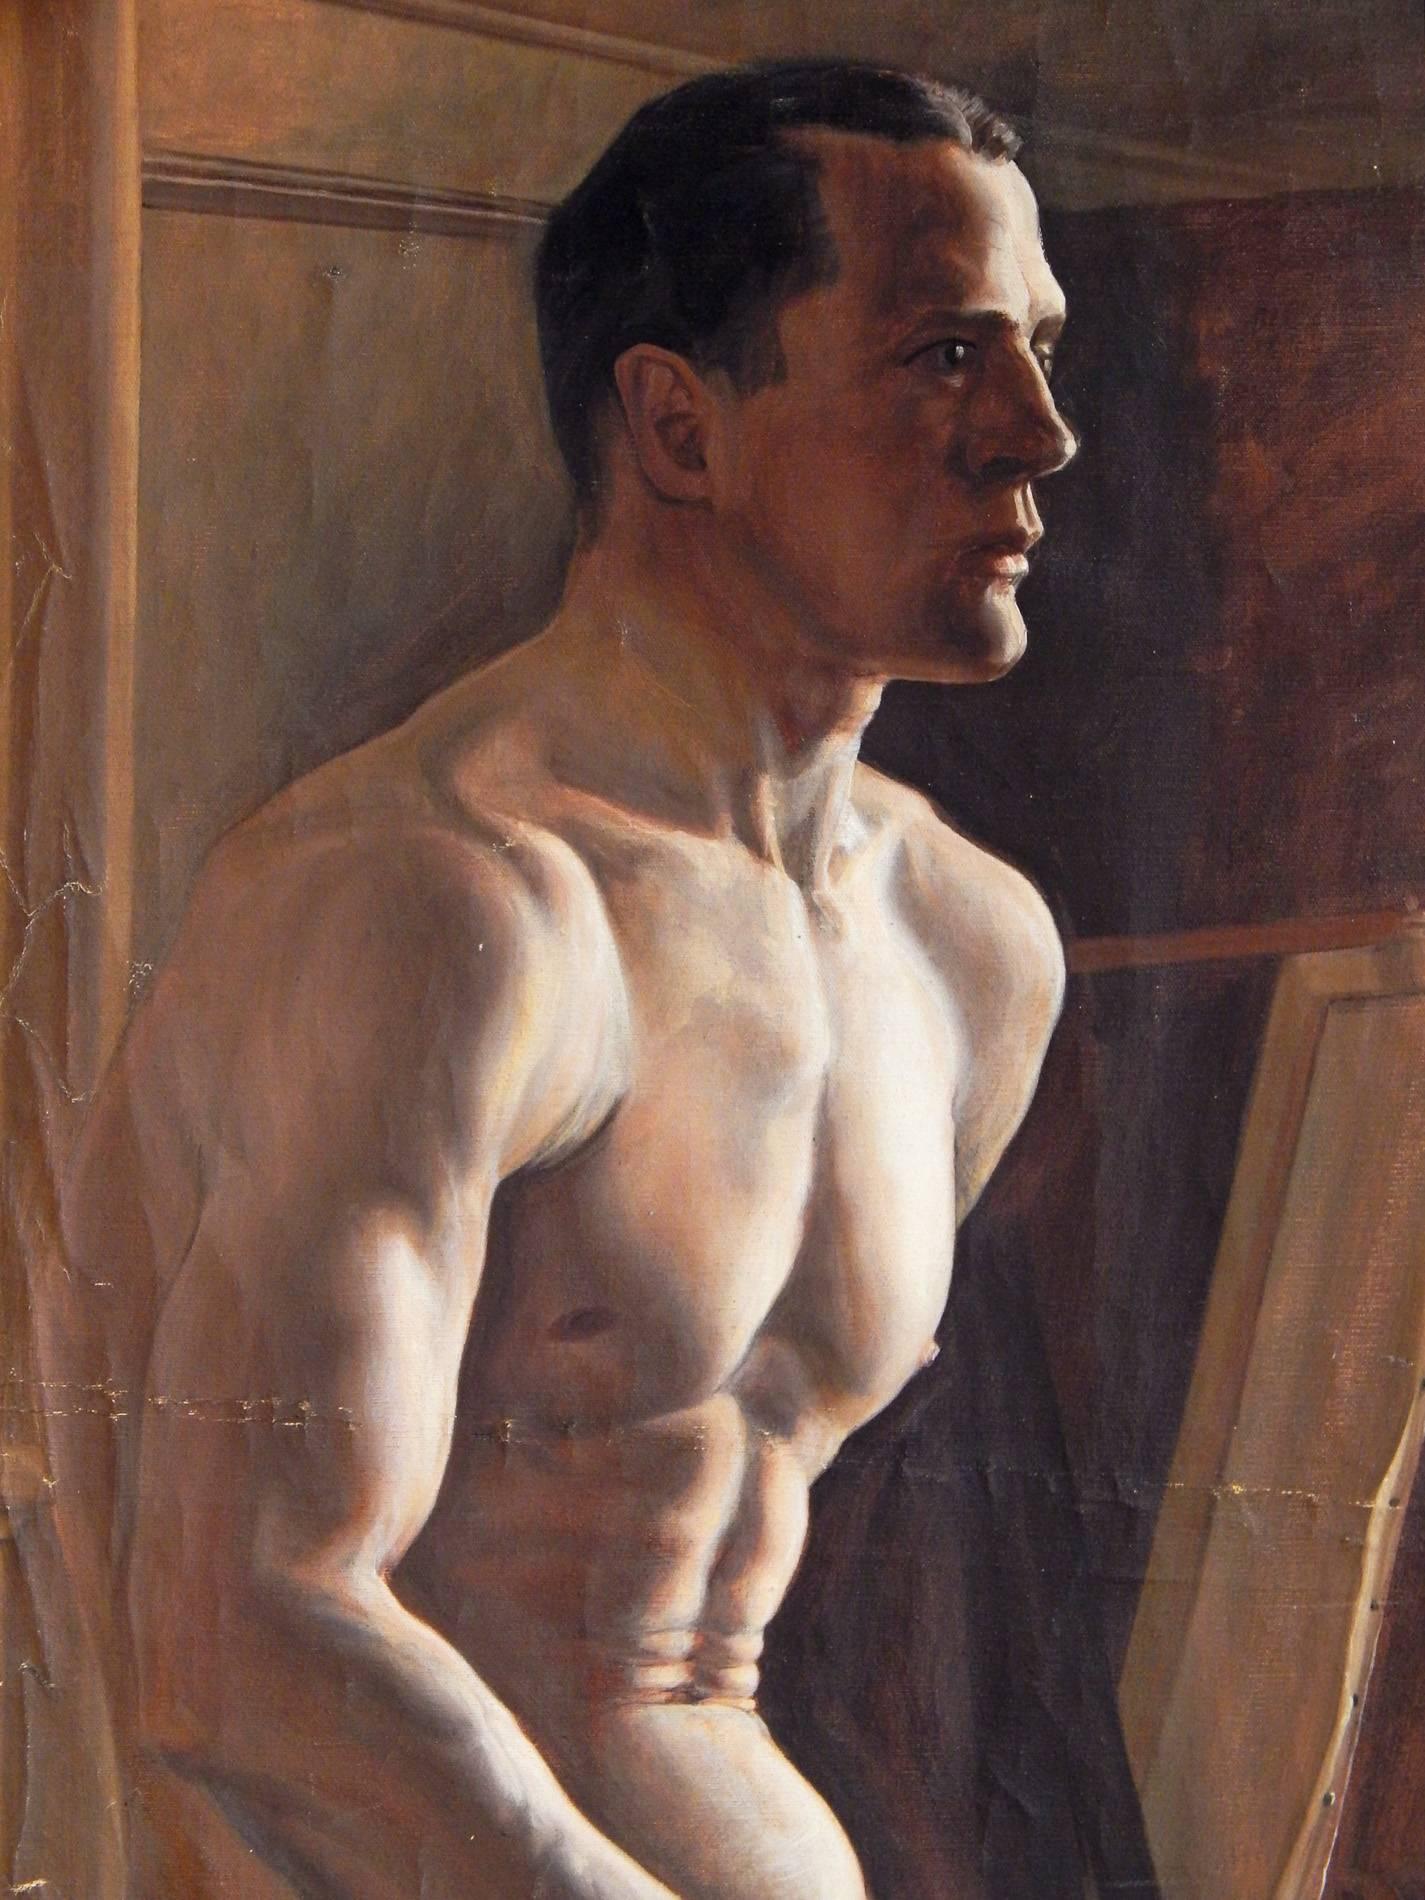 Dramatically lit, like a scene from a 1930s film, this depiction of a seated male nude figure with a strong face out of central casting is one of the finest Art Deco-era figural paintings we have offered. The man's sunburned face is apparent under